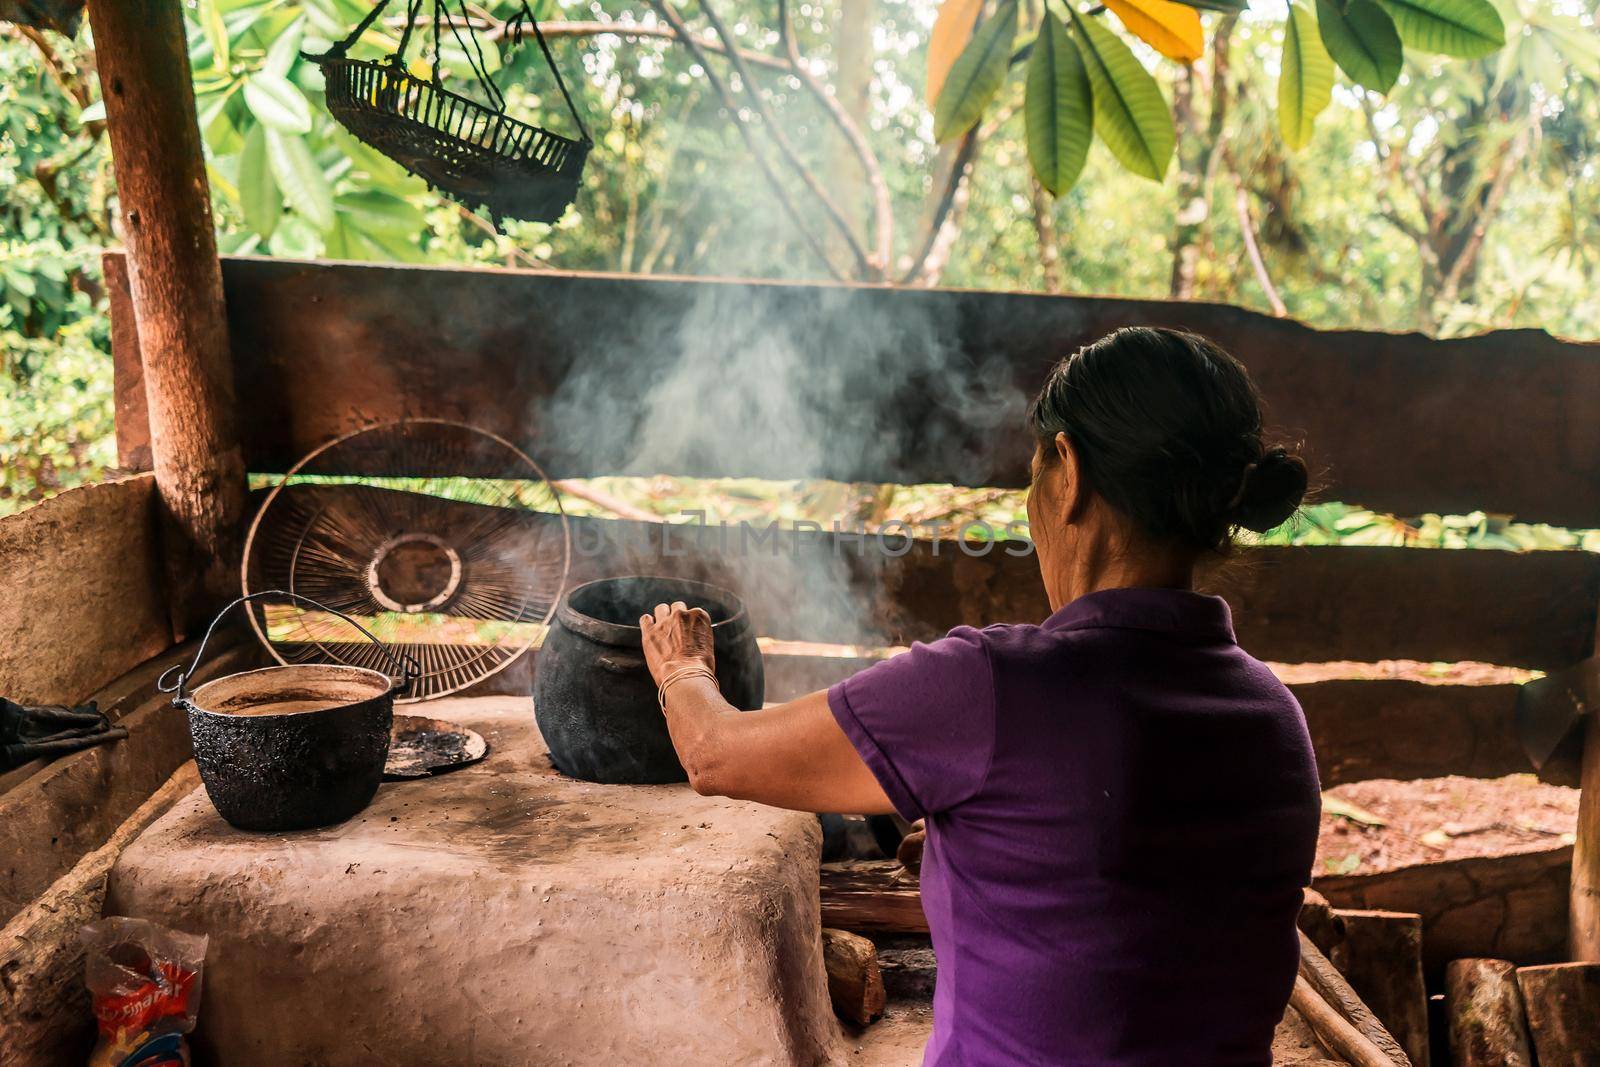 Latin grandmother with arms cooking in pots on the stove at home by cfalvarez